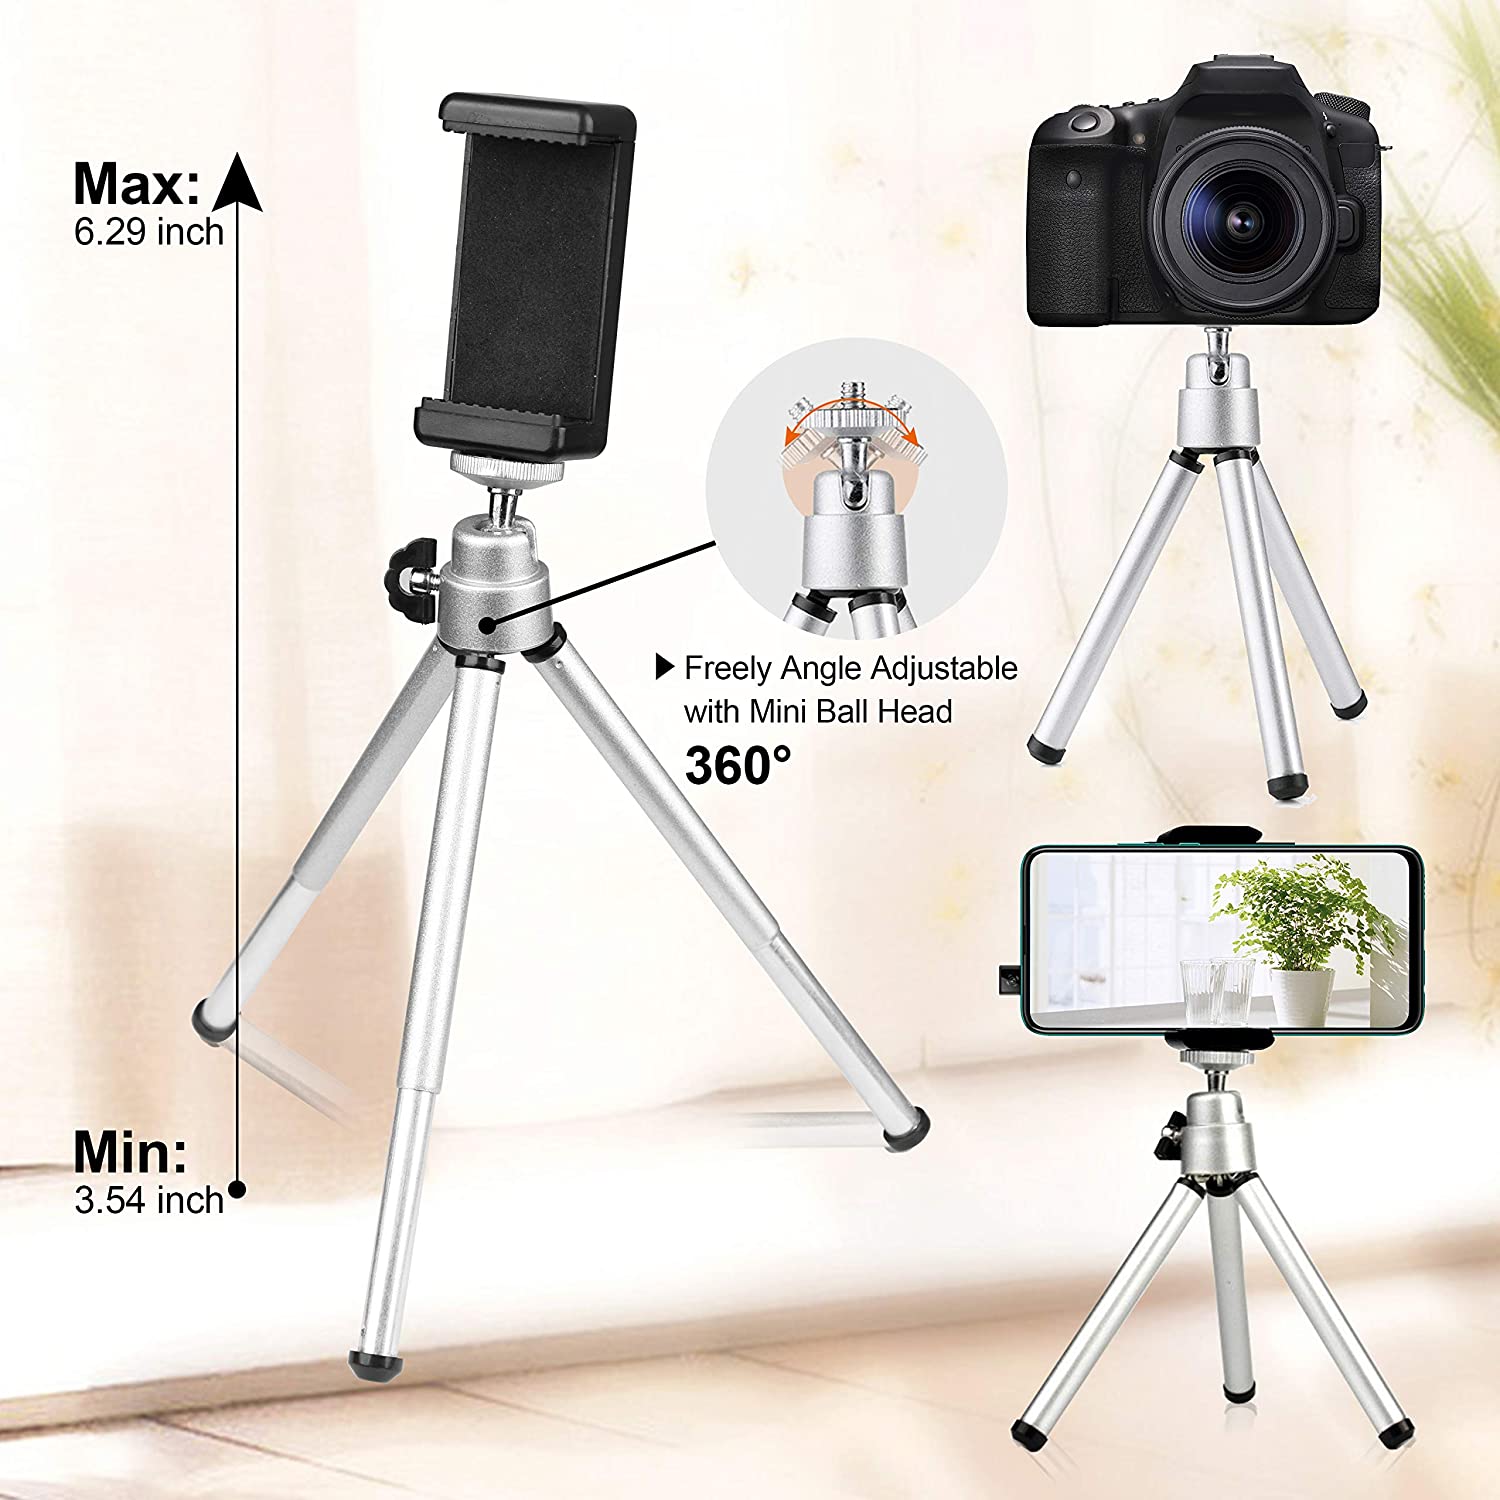 Emart 16 x 16 Inch Lighting Photography Studio Box Kit Tabletop Photo Light Shooting Tent, Portable Table Top Tripod Stand Holder for Phone